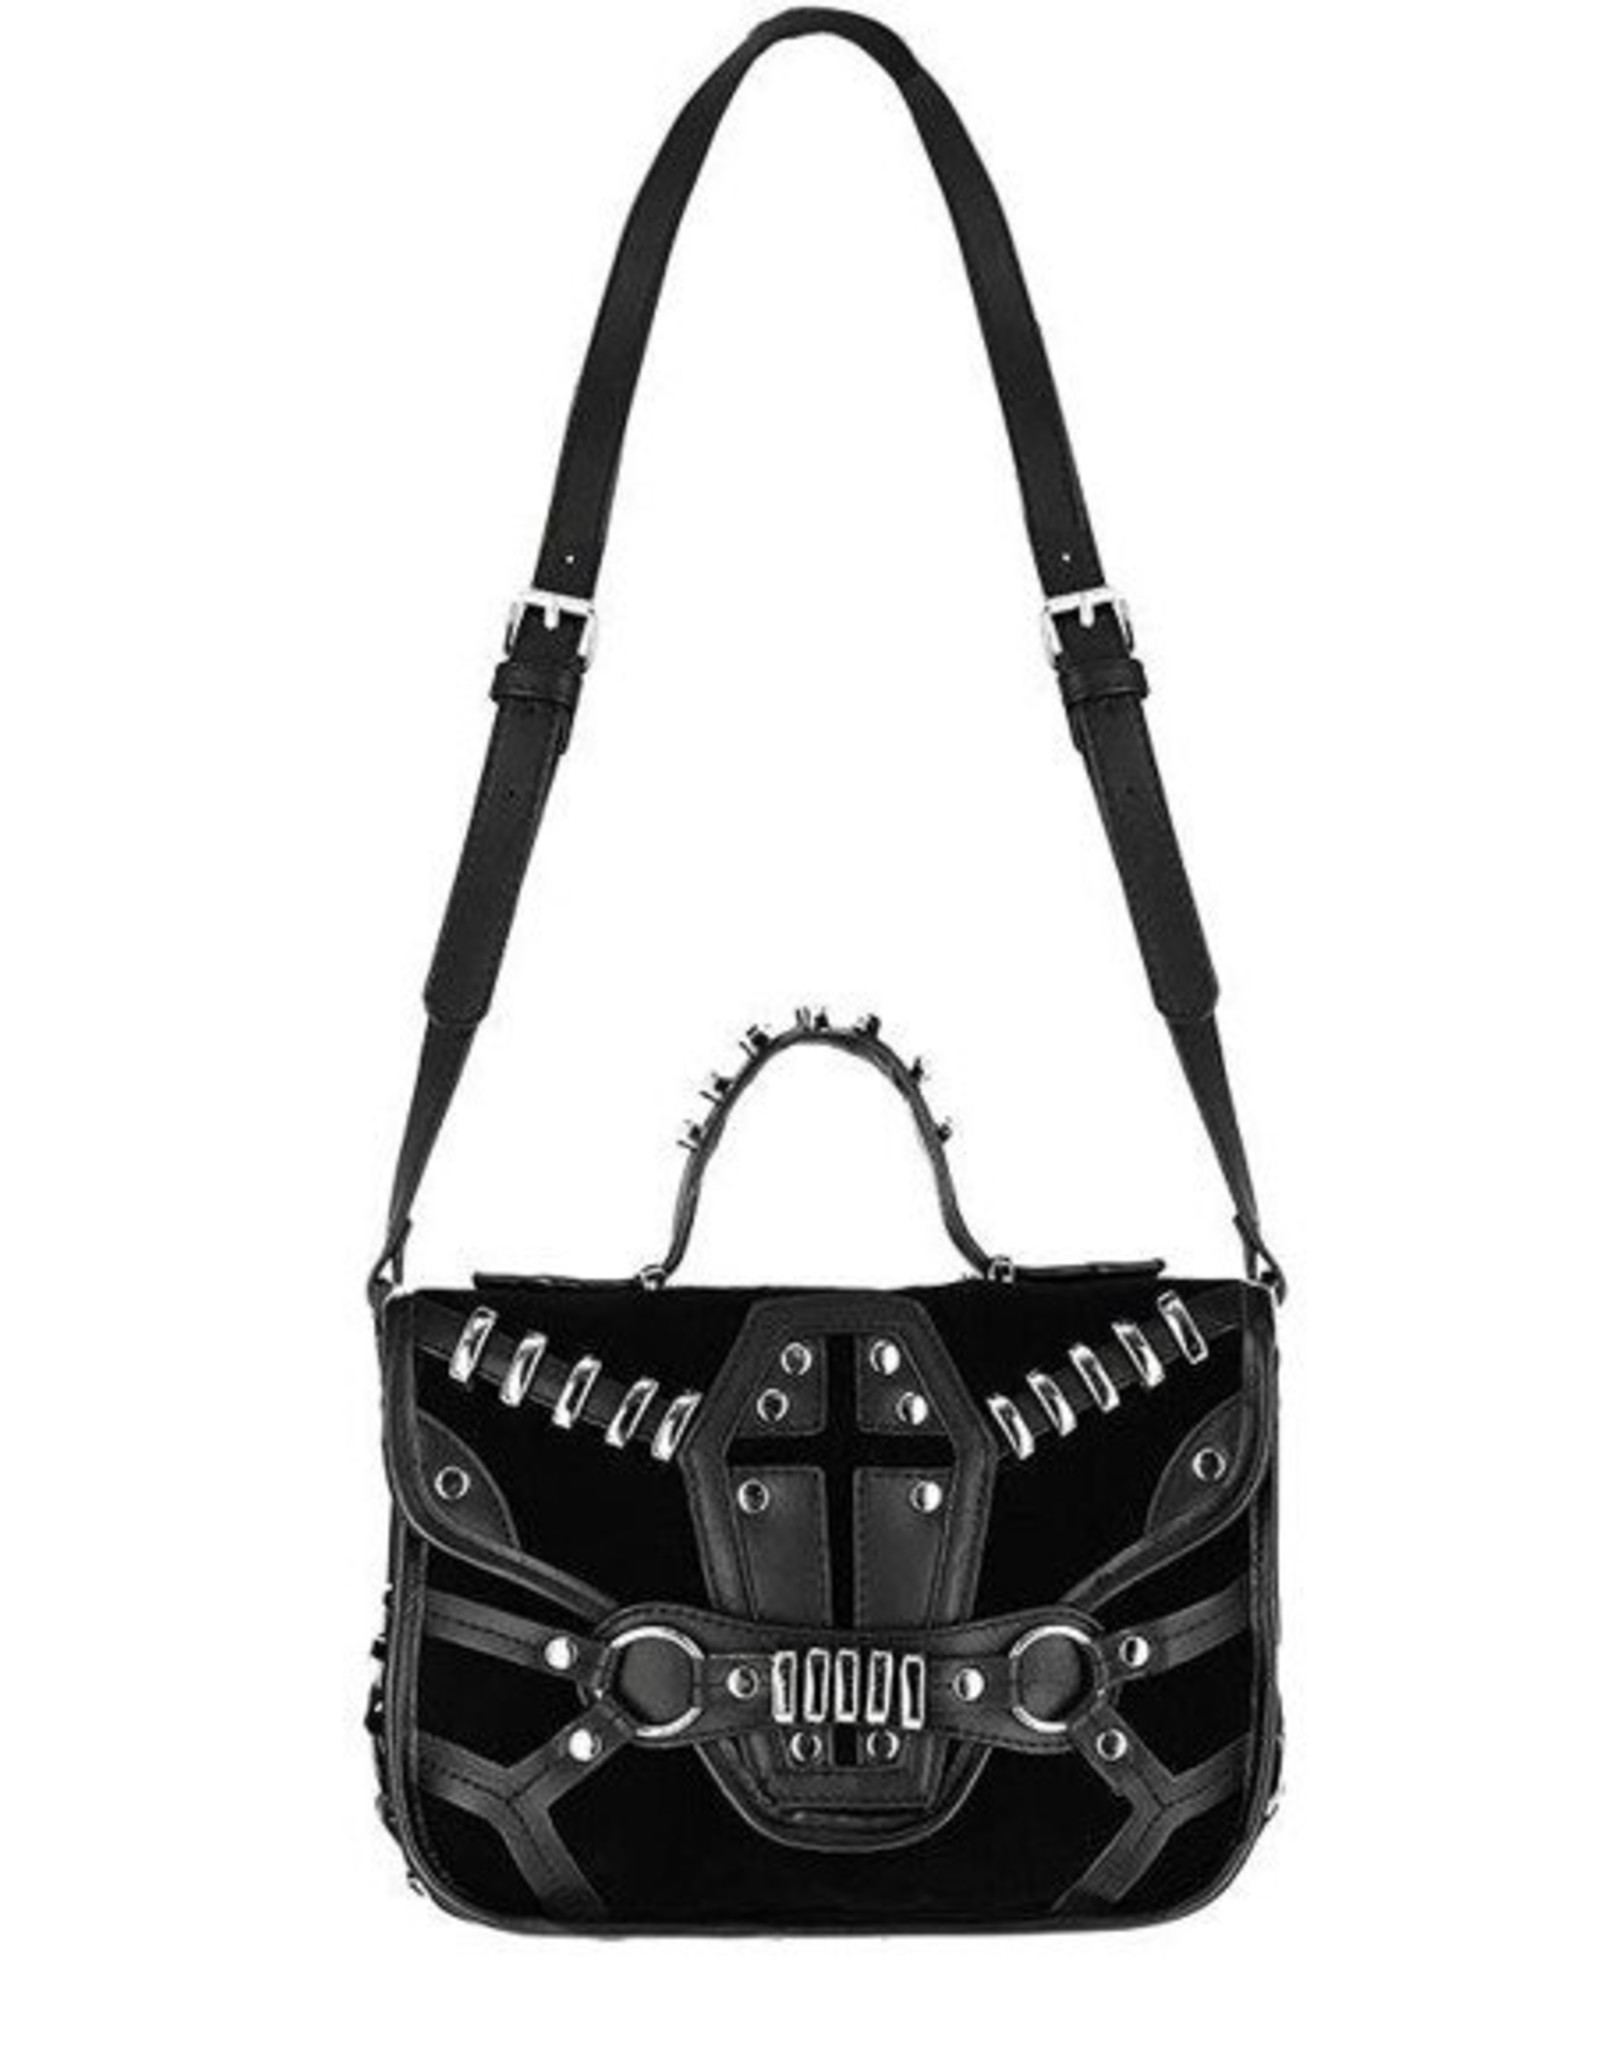 Restyle Gothic bags Steampunk bags - Coffin Purse Gothic Handbag with a Coffin Motif and Metal Elements